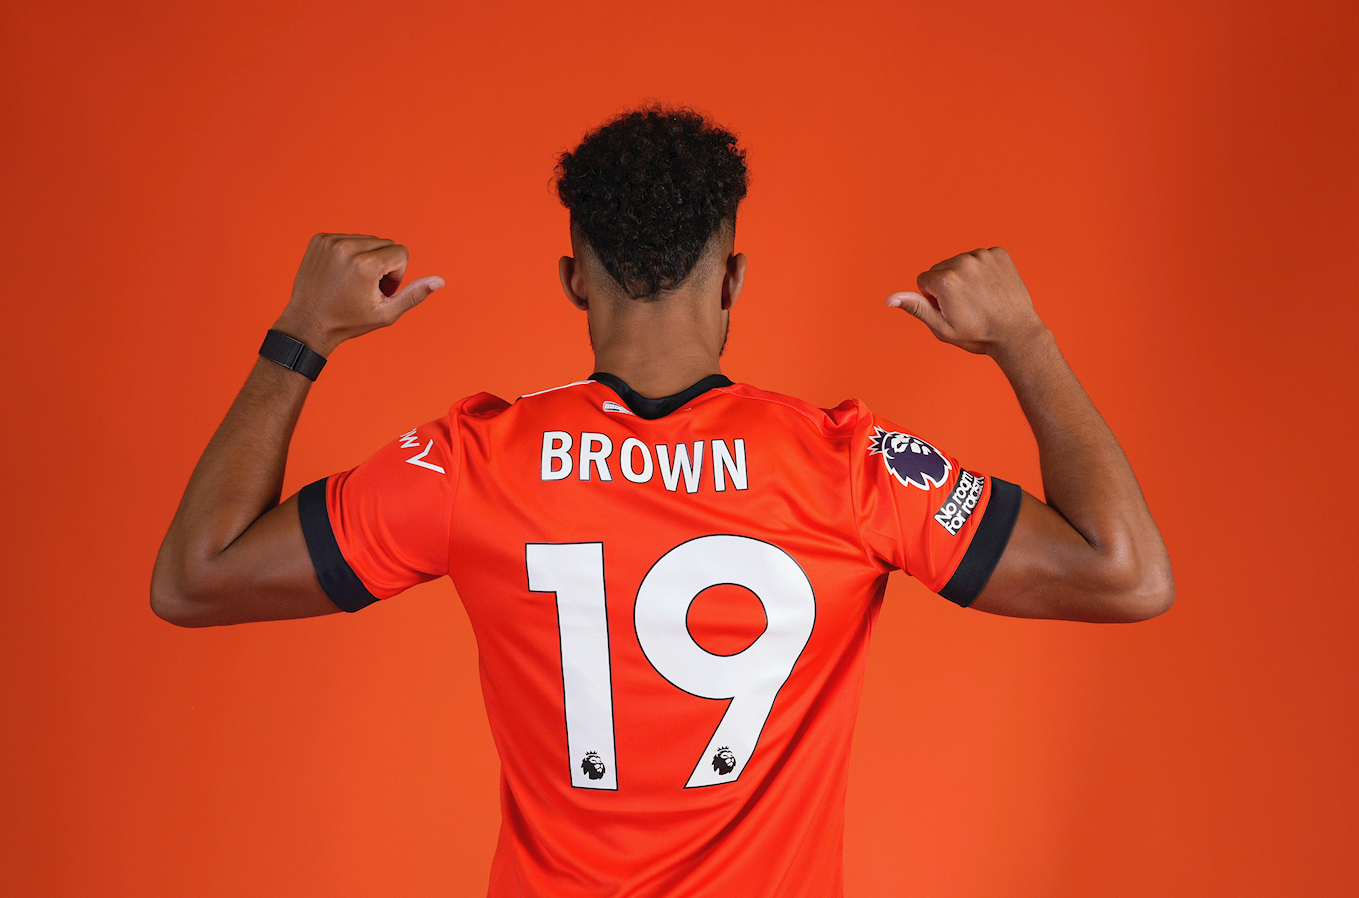 Jacob Brown pointing at the back of his shirt, which has his surname and the number 19.